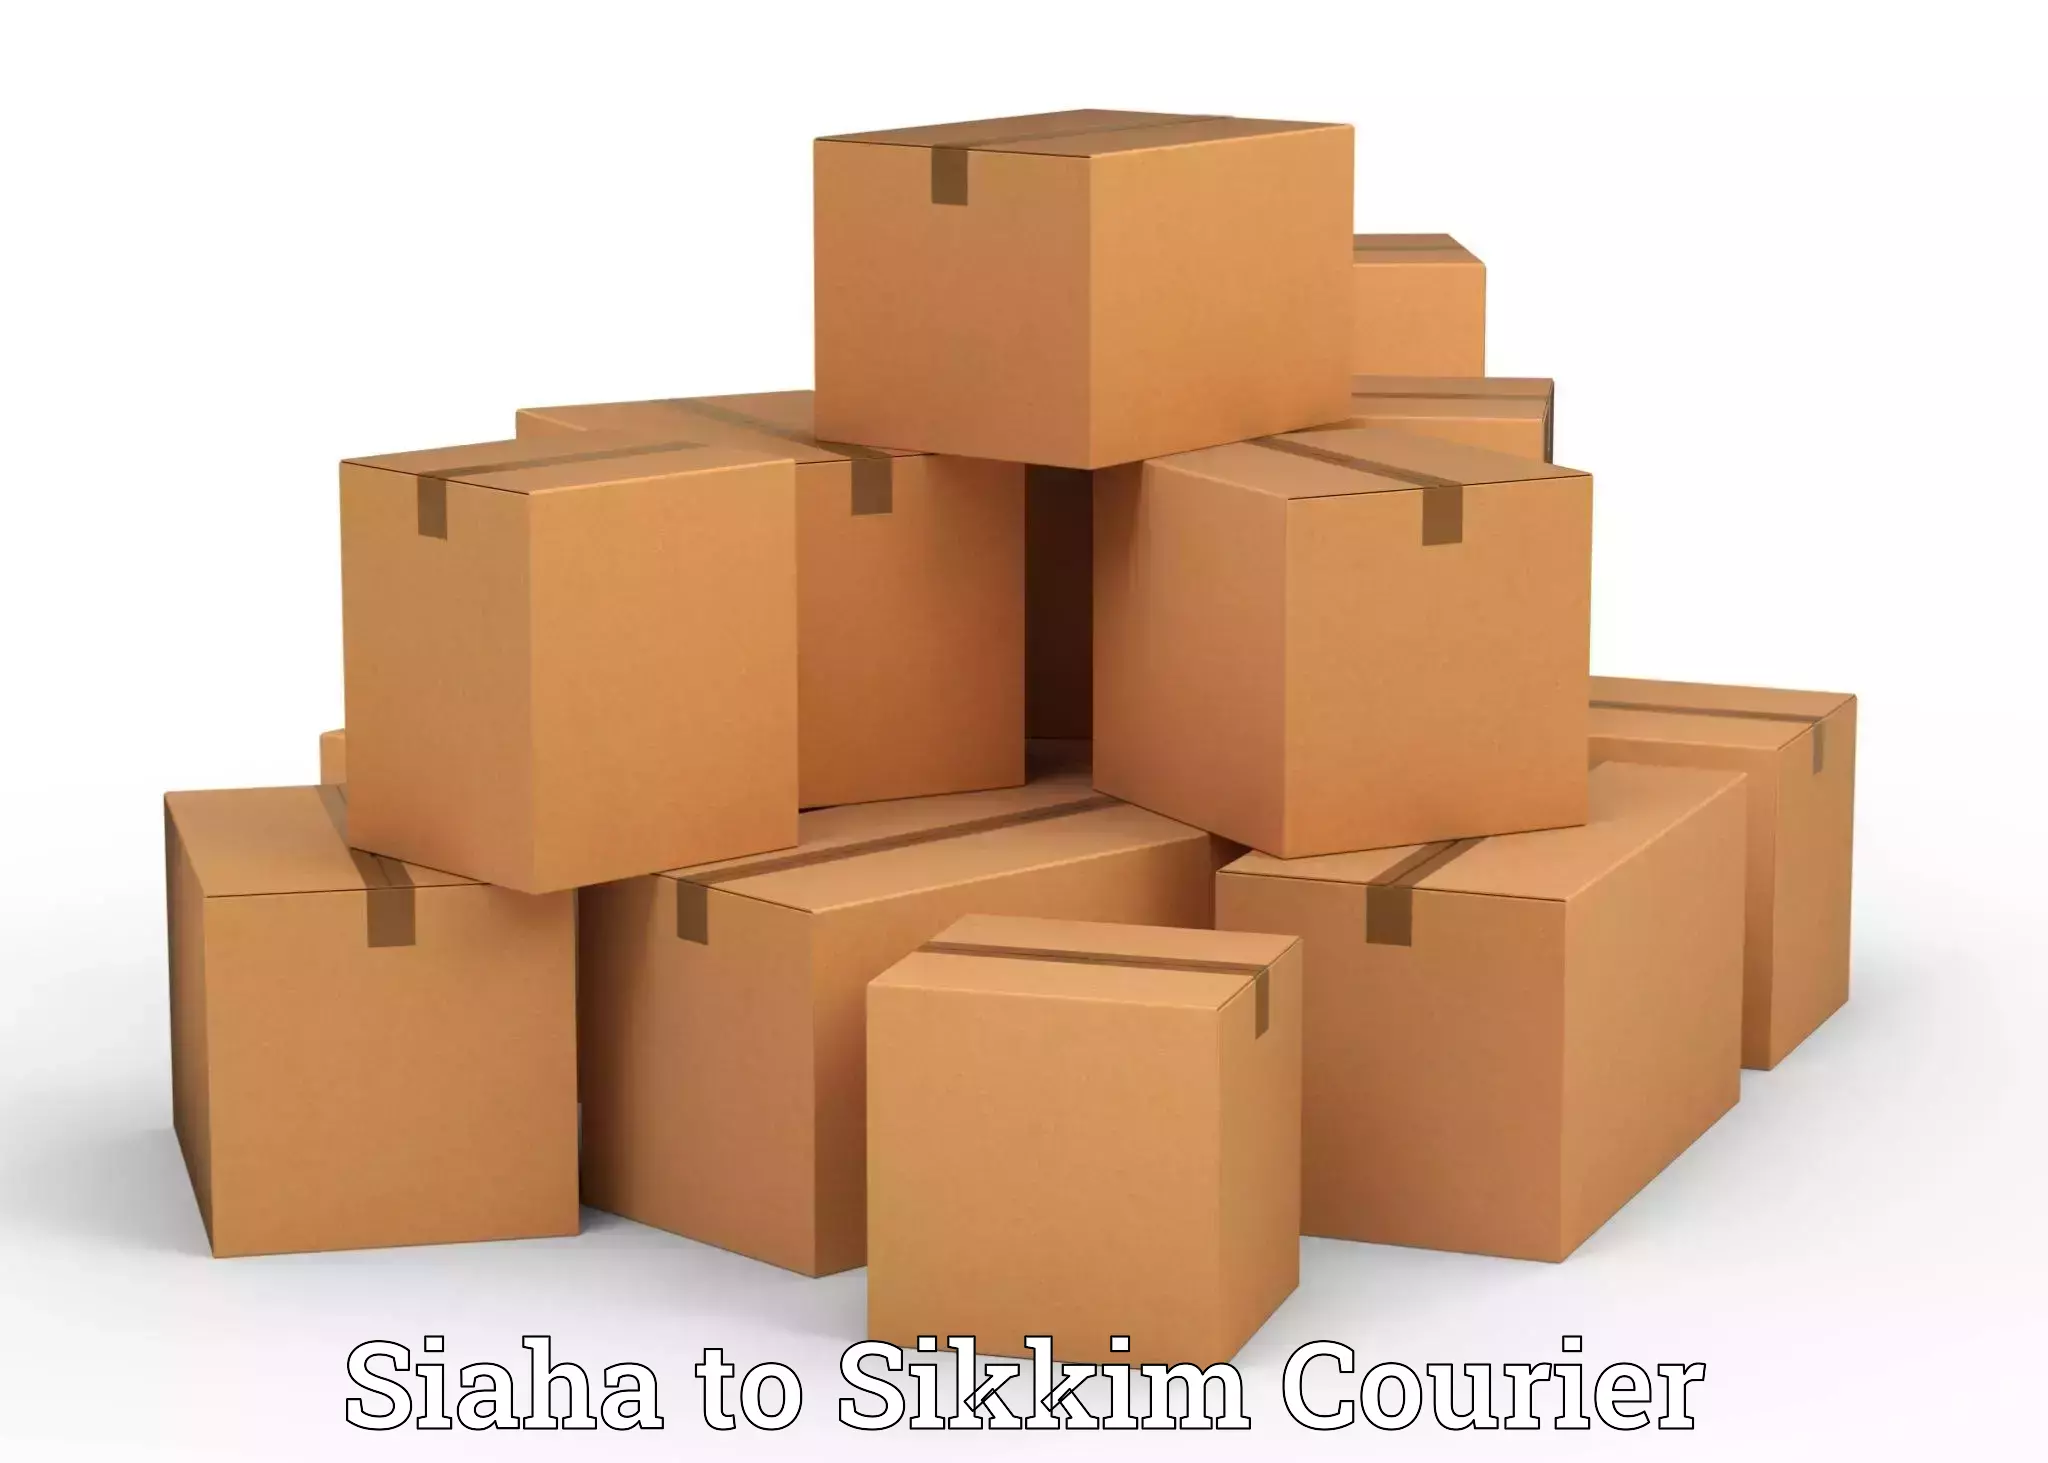 Dependable moving services Siaha to Mangan